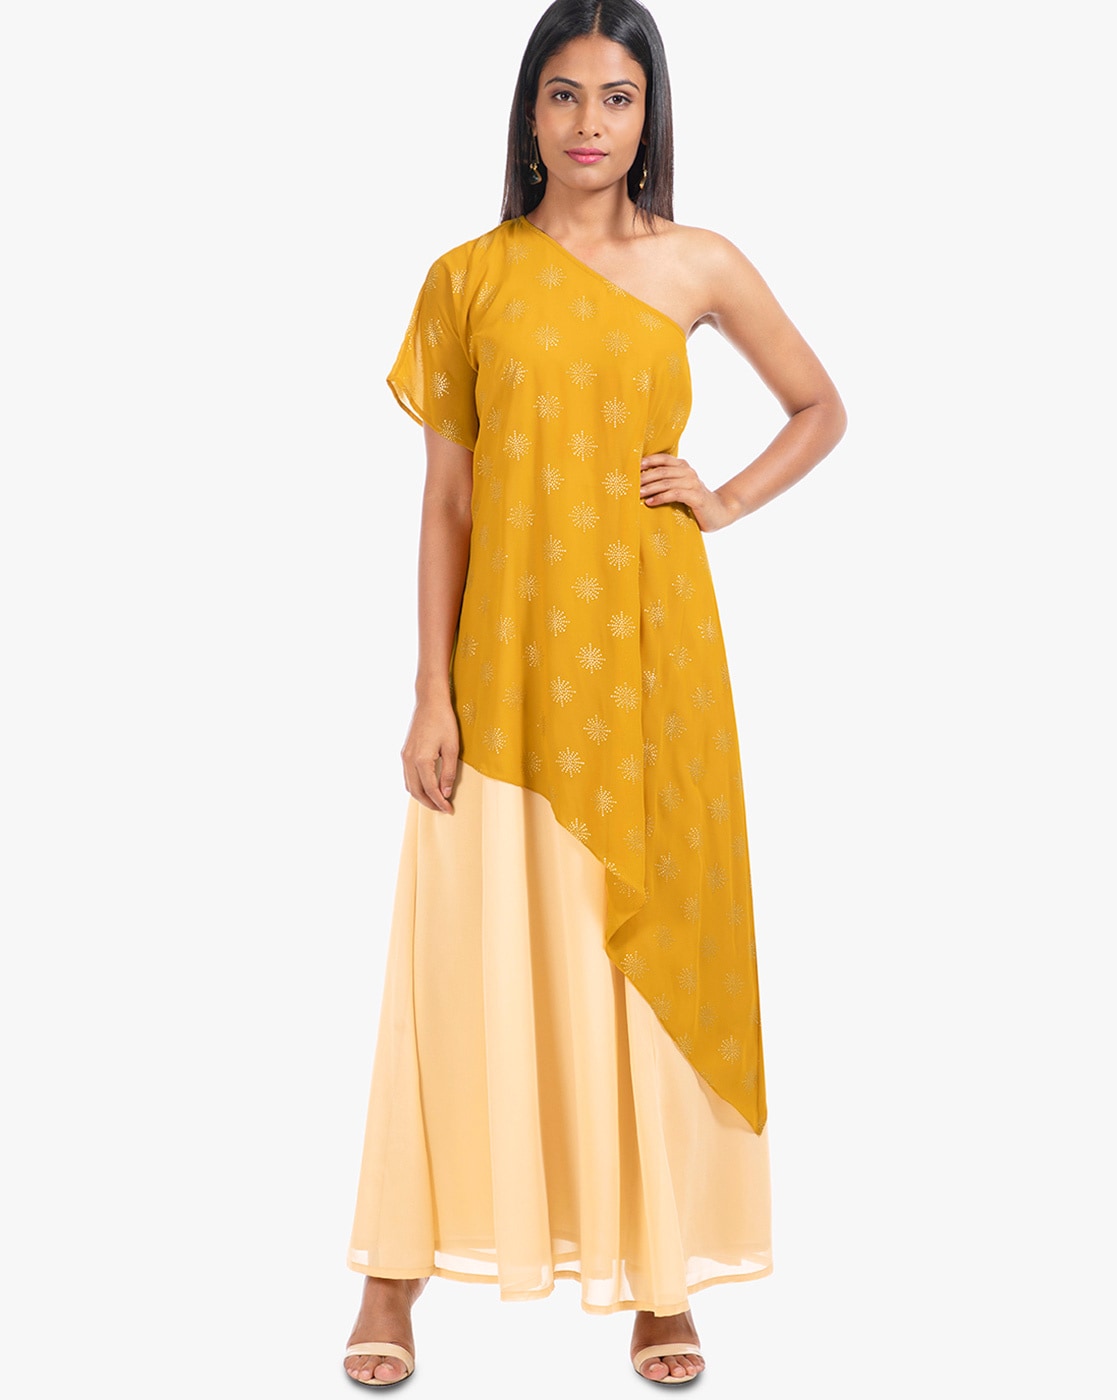 Turn Heads This Season With These Modern Kurtis For Jeans! Learn To ...